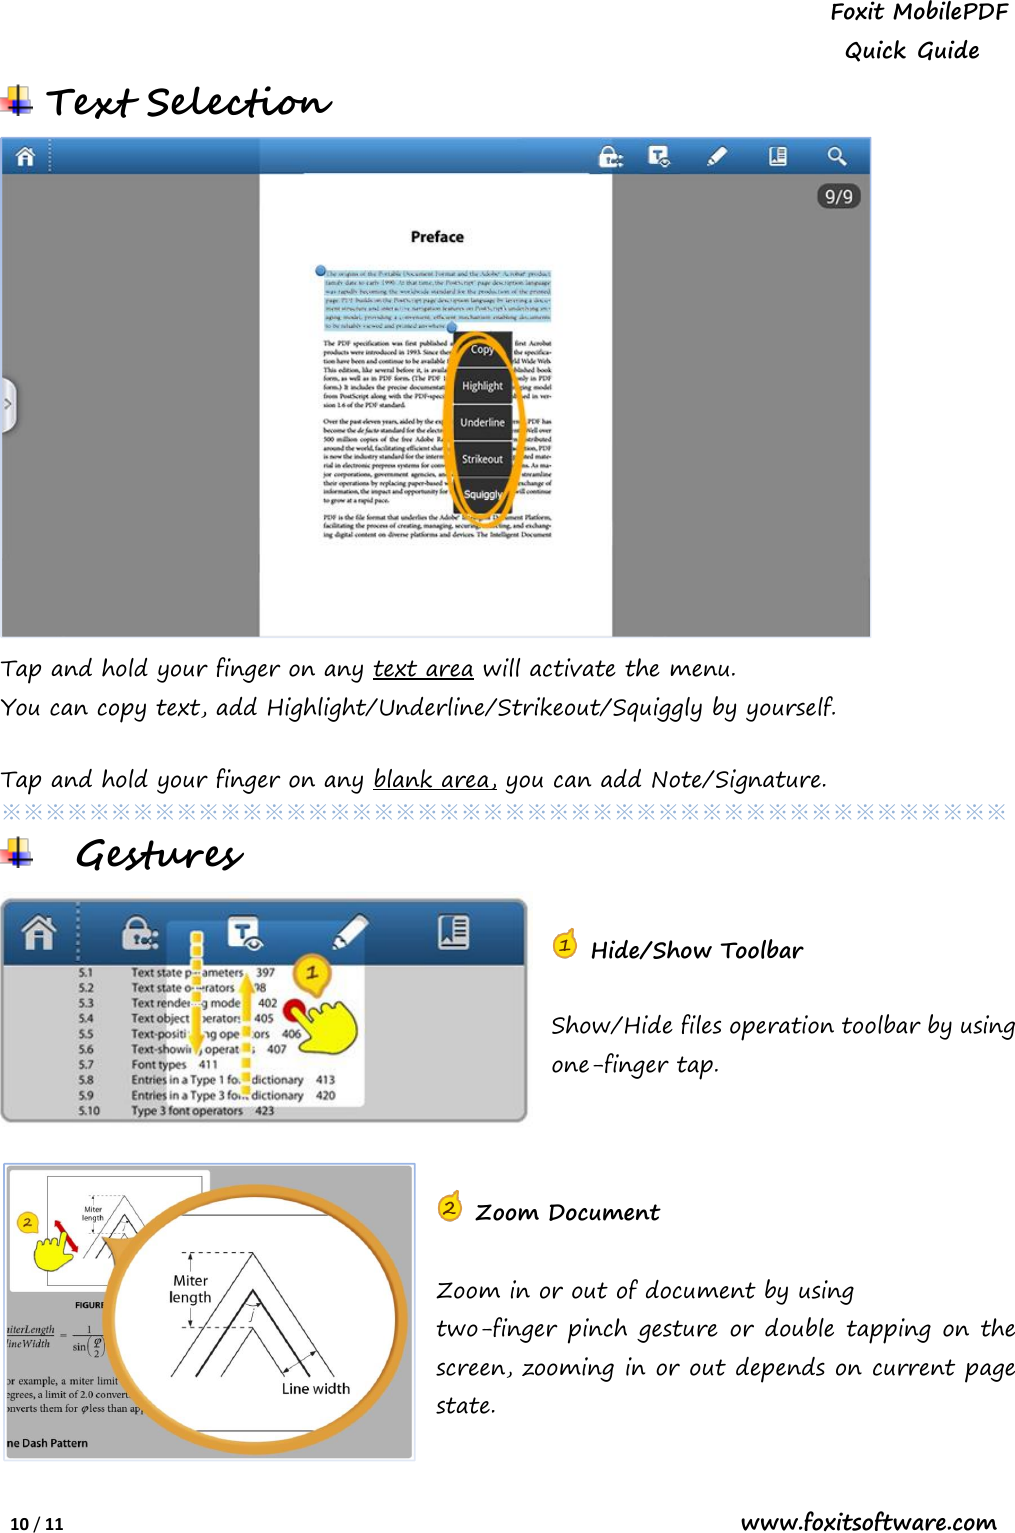 Page 10 of 11 - Foxit  Mobile PDF With RMS For Android - Quick Guide PDFWith RMSfor Um En